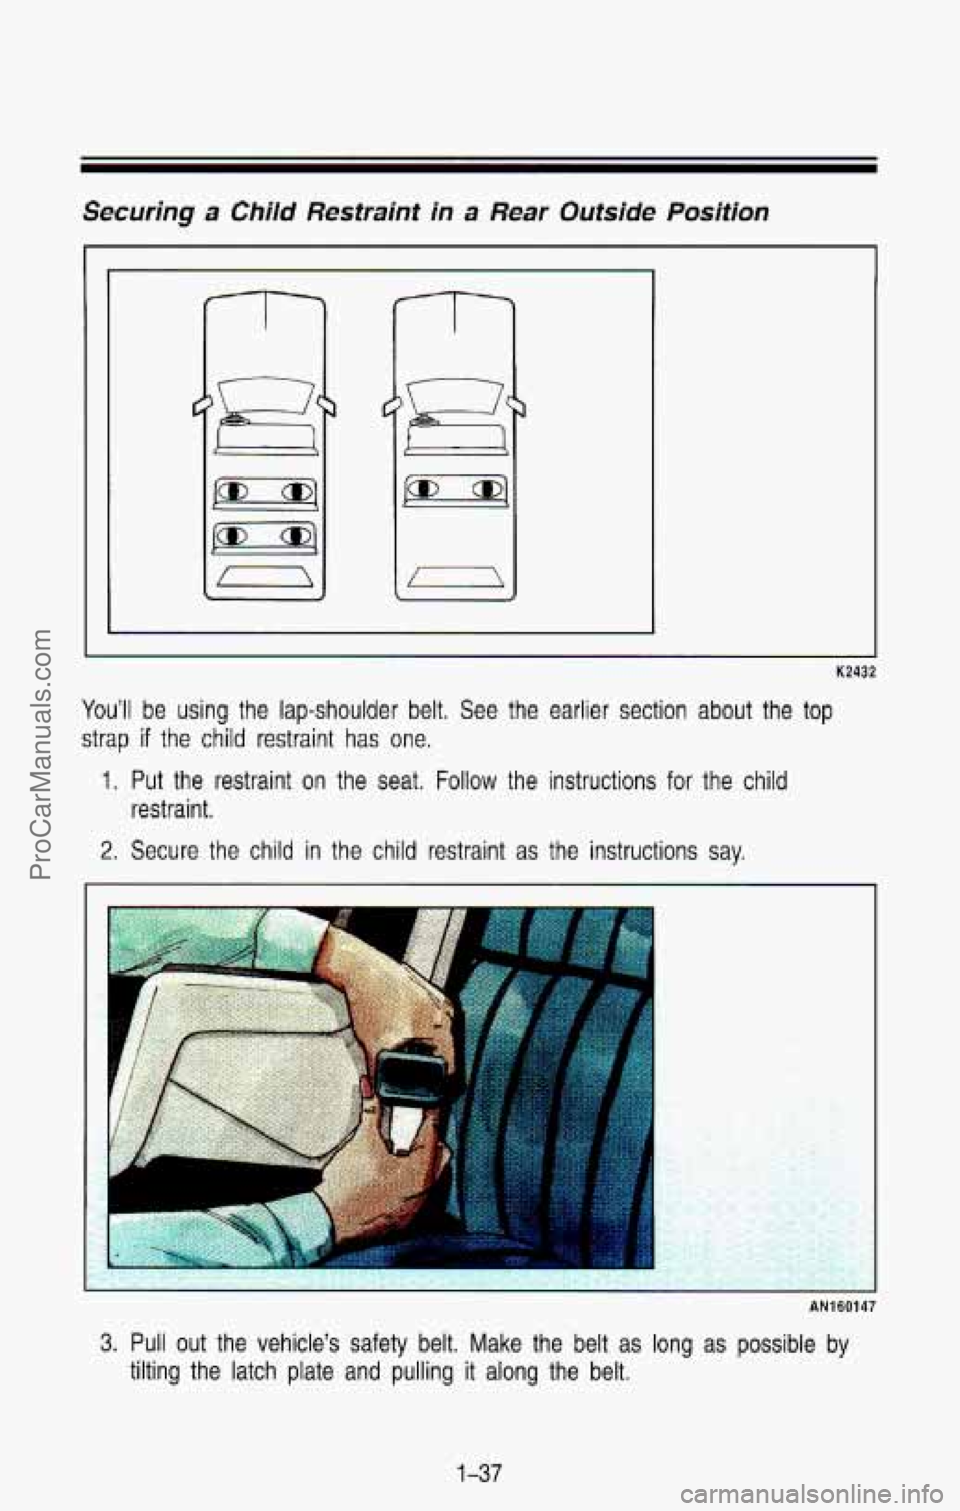 CHEVROLET SUBURBAN 1993  Owners Manual Securing a Child Restraint  in a Rear  Outside  Position 
I 
--I- 
K2432 
You’ll be using  the  lap-shoulder  belt.  See  the  earlier  section  about  the \
top 
strap if the  child  restraint has 